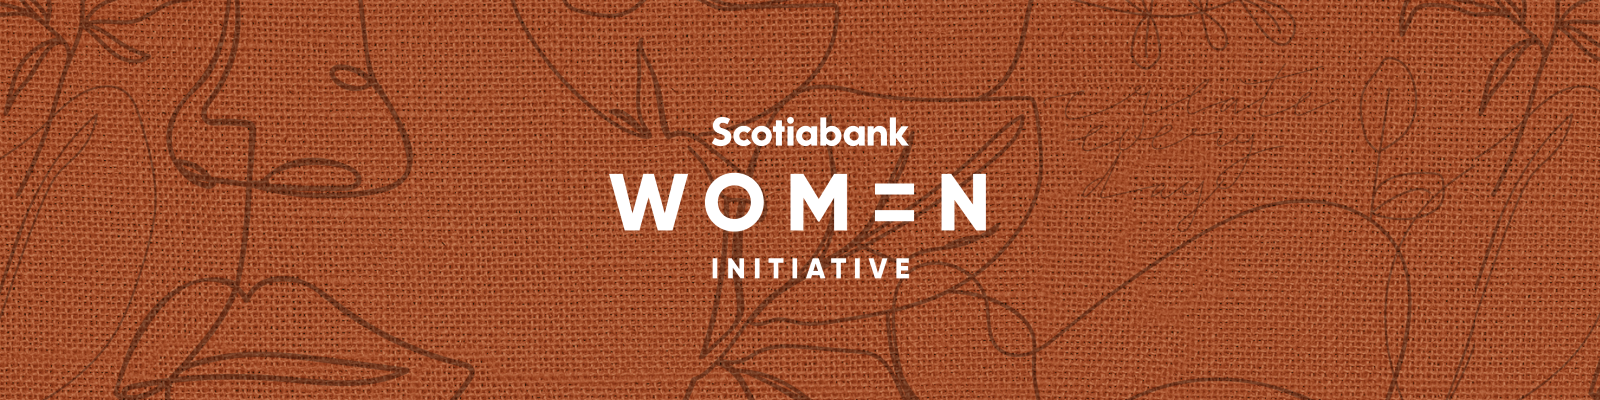 The Scotiabank Women Initiative™ Indra Nooyi Fireside Chat